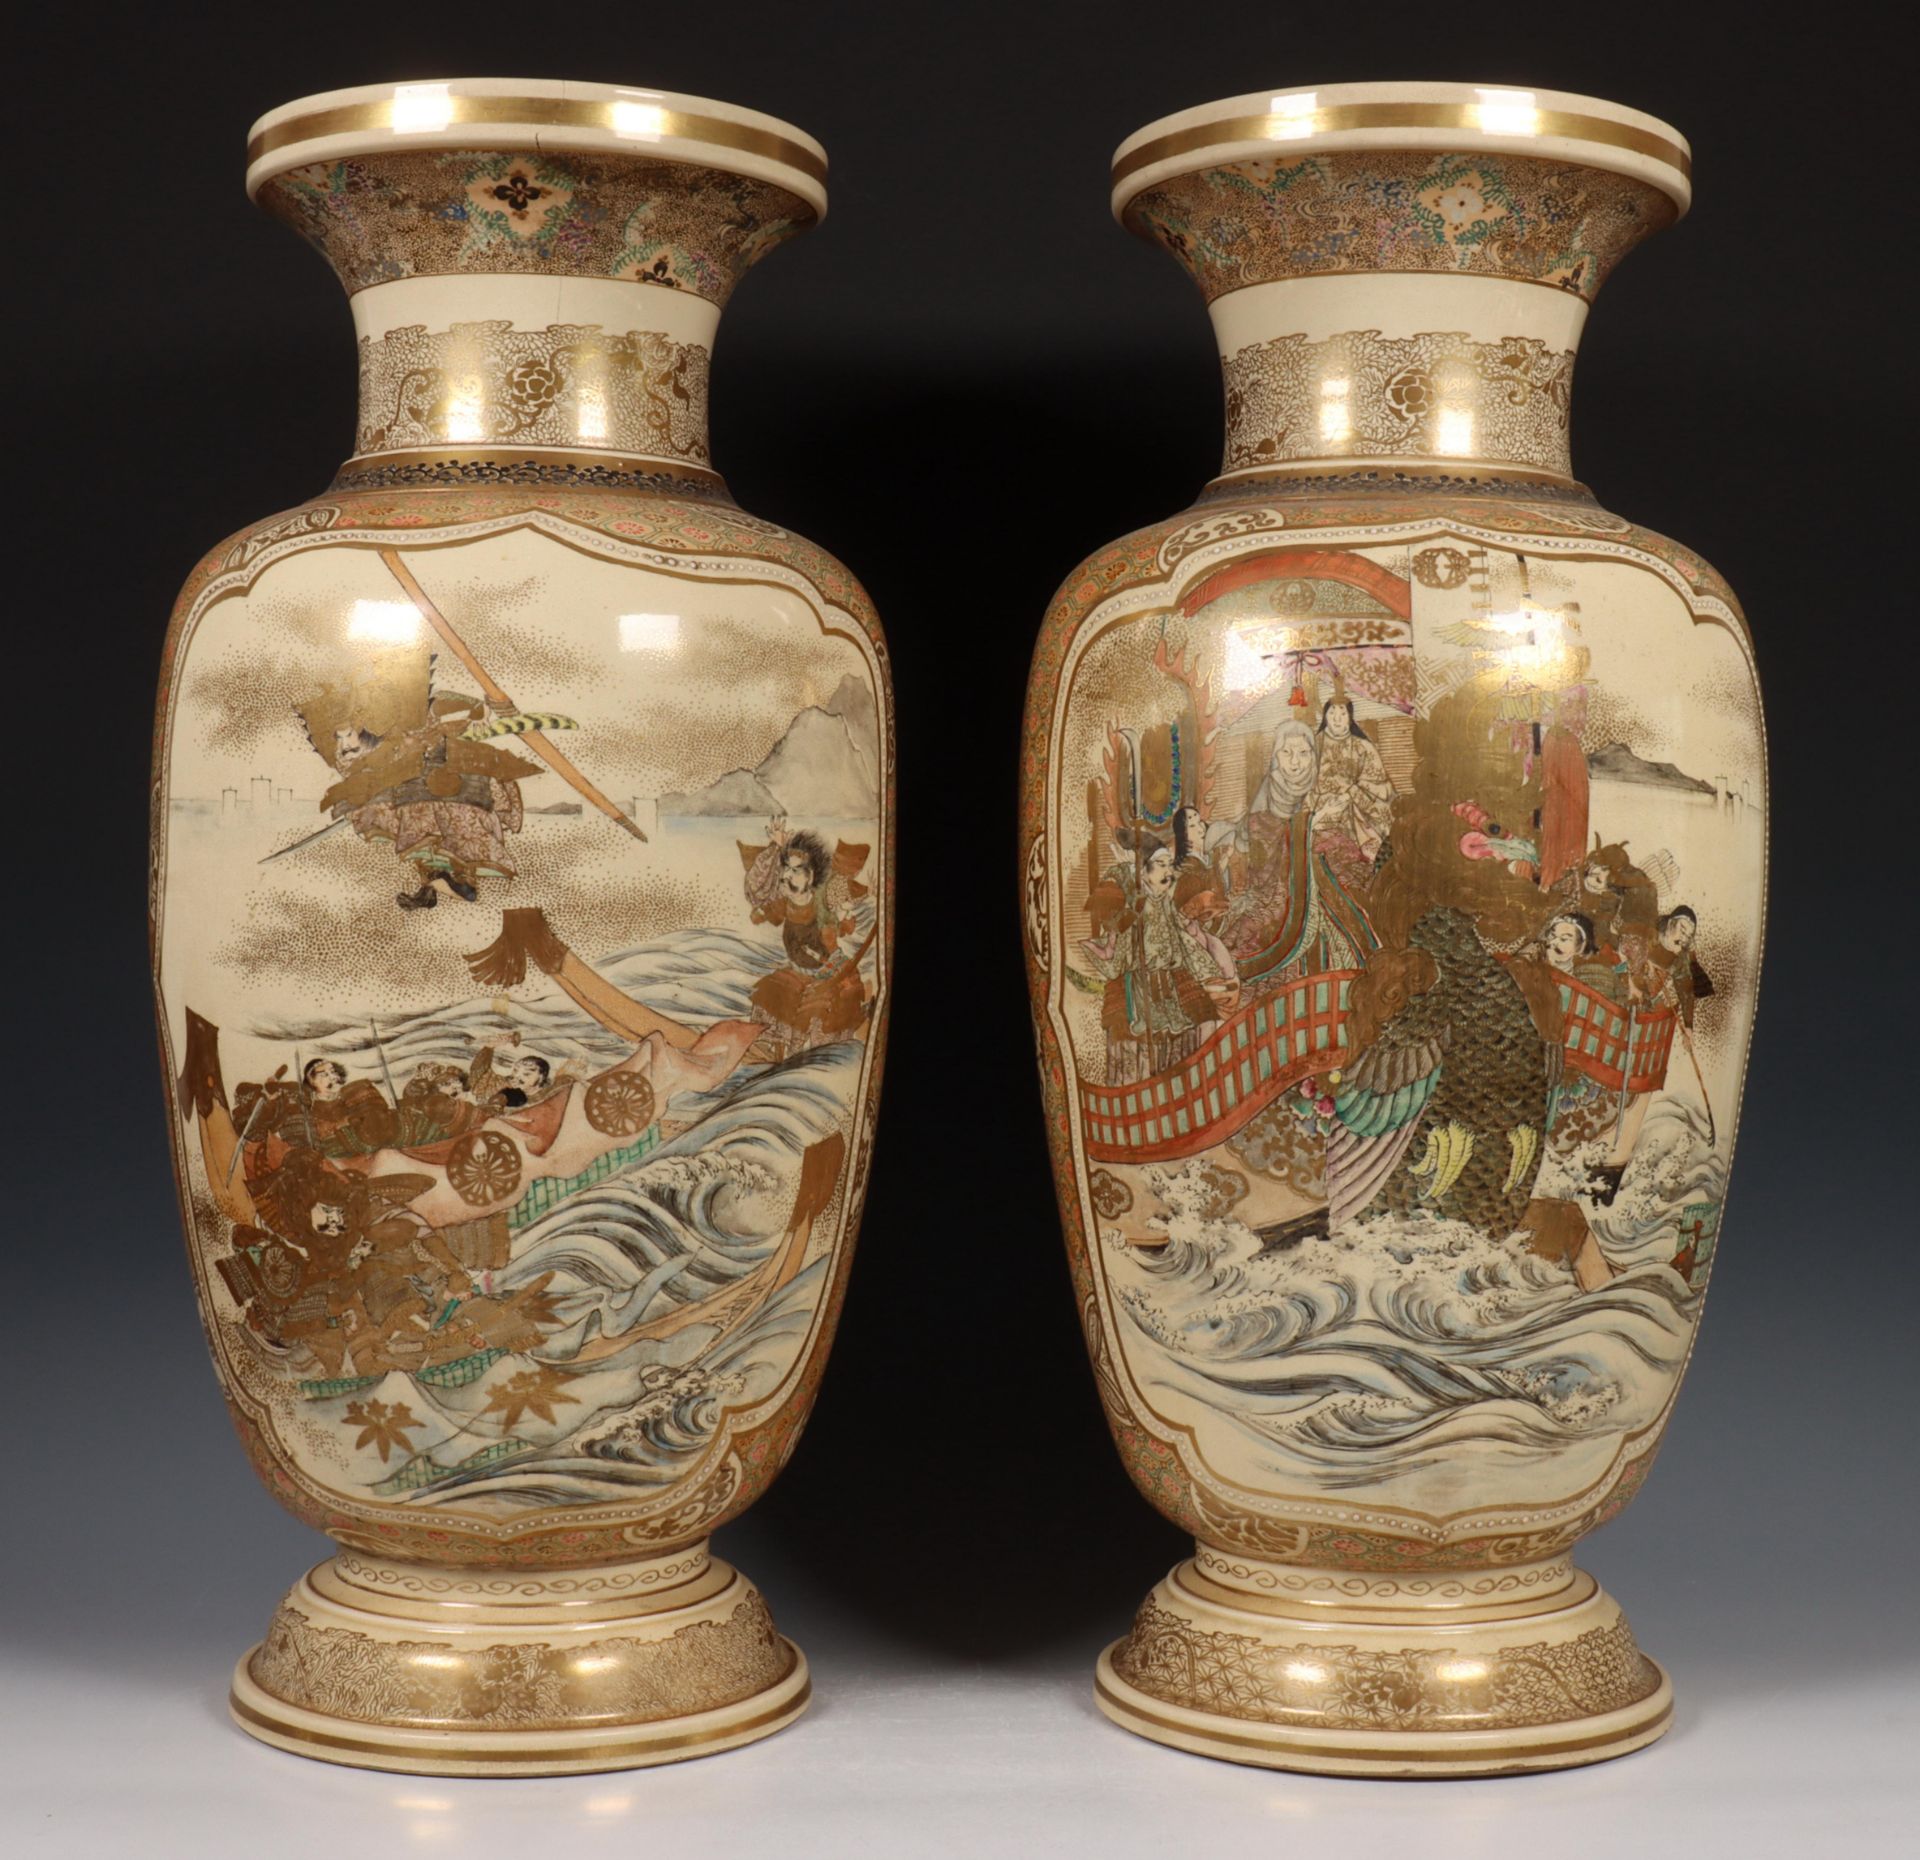 Japan, two Satsuma baluster vases, late 19th century, variously decorated with scenes of Samurai - Image 7 of 7